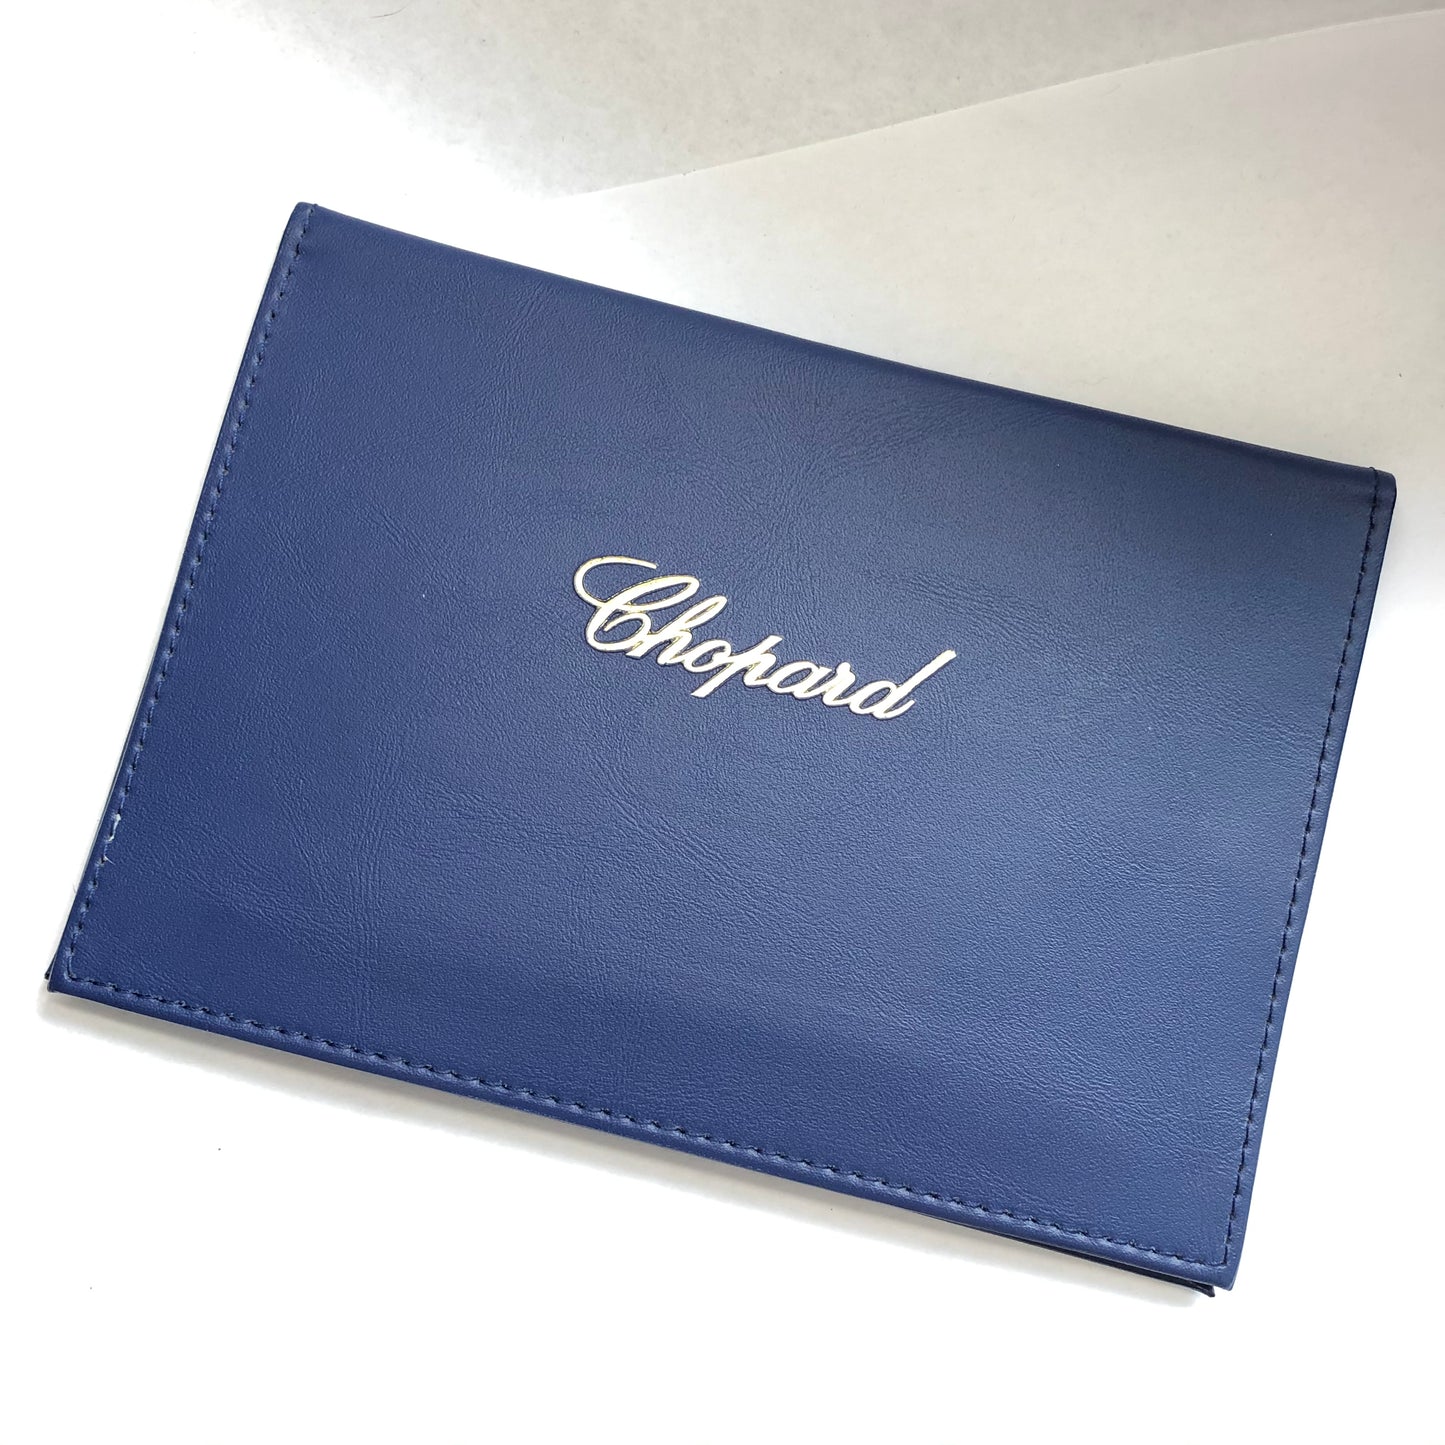 CHOPARD Blue Faux Leather Documents Folder 4.75 x 6.75 inches